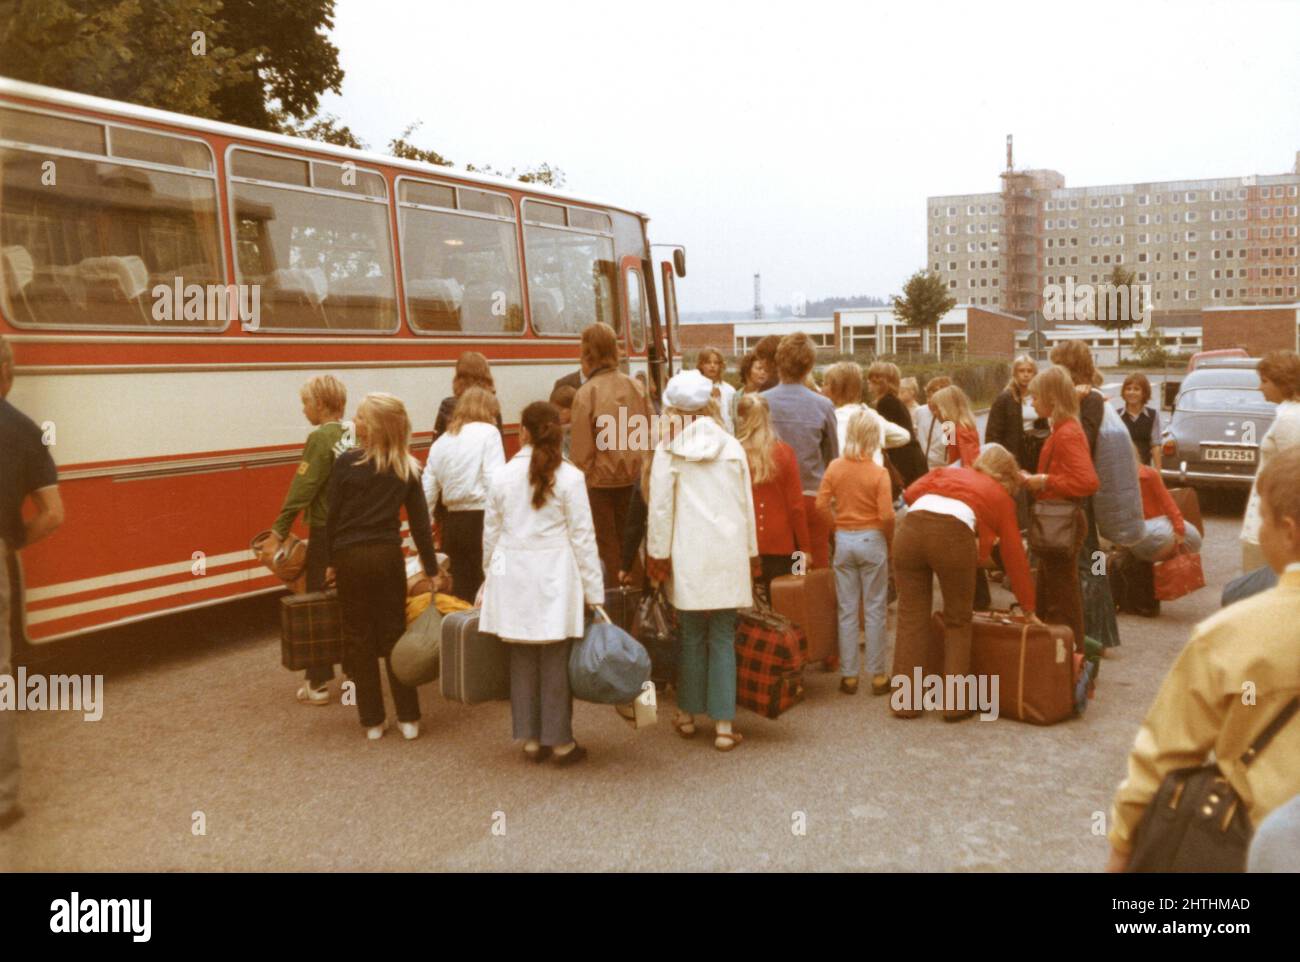 1970's photograph of children queuing with baggage luggage for school coach trip, Sweden Stock Photo